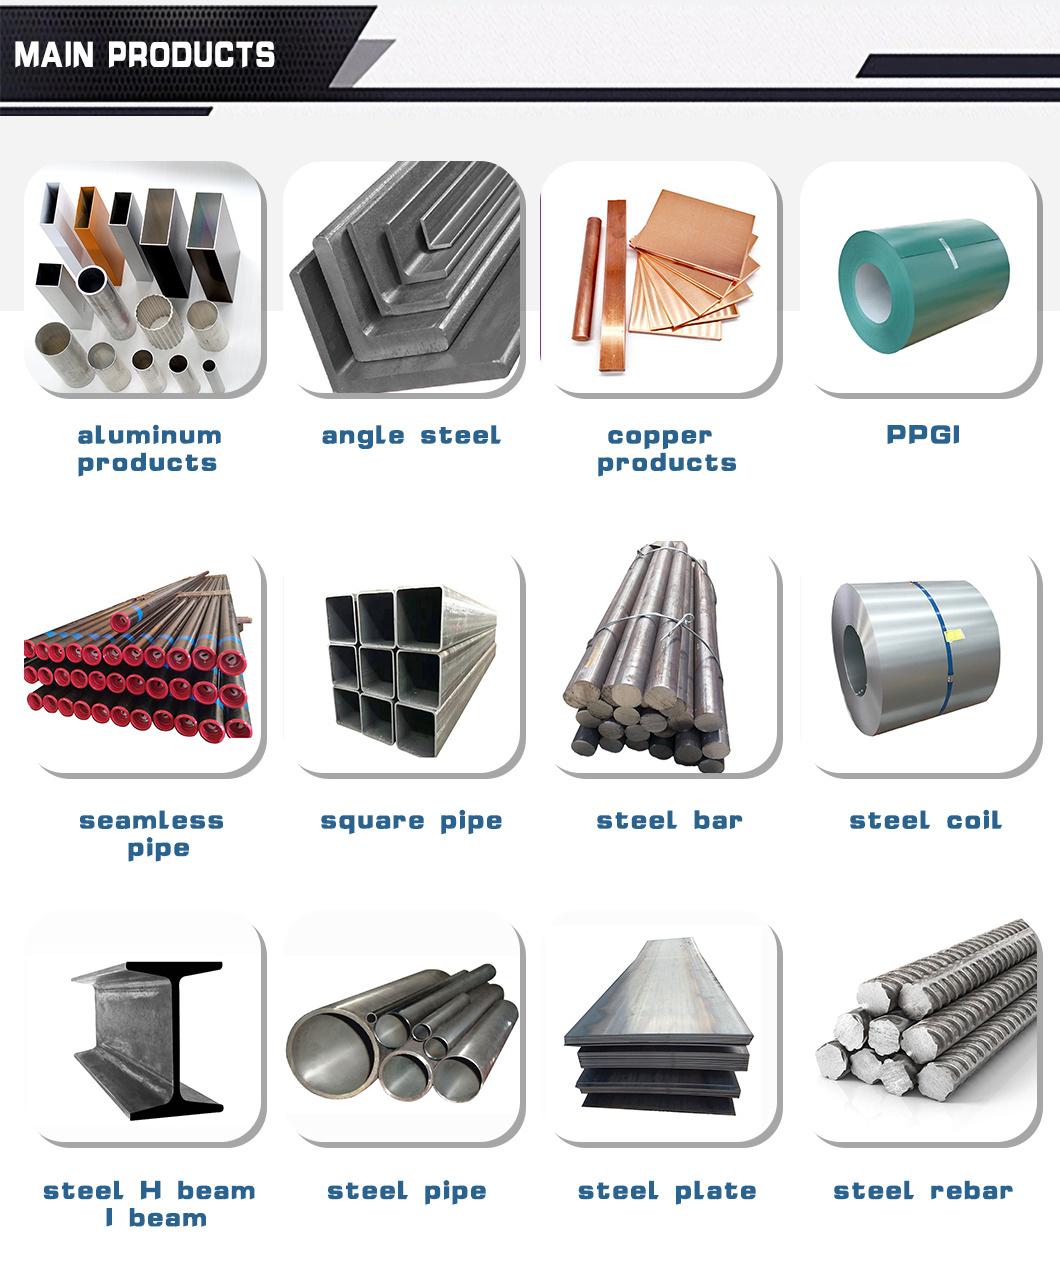 Wholesale High Precison Cold Drawn Customized AISI Low Alloy Seamless Steel Pipe with Building Material